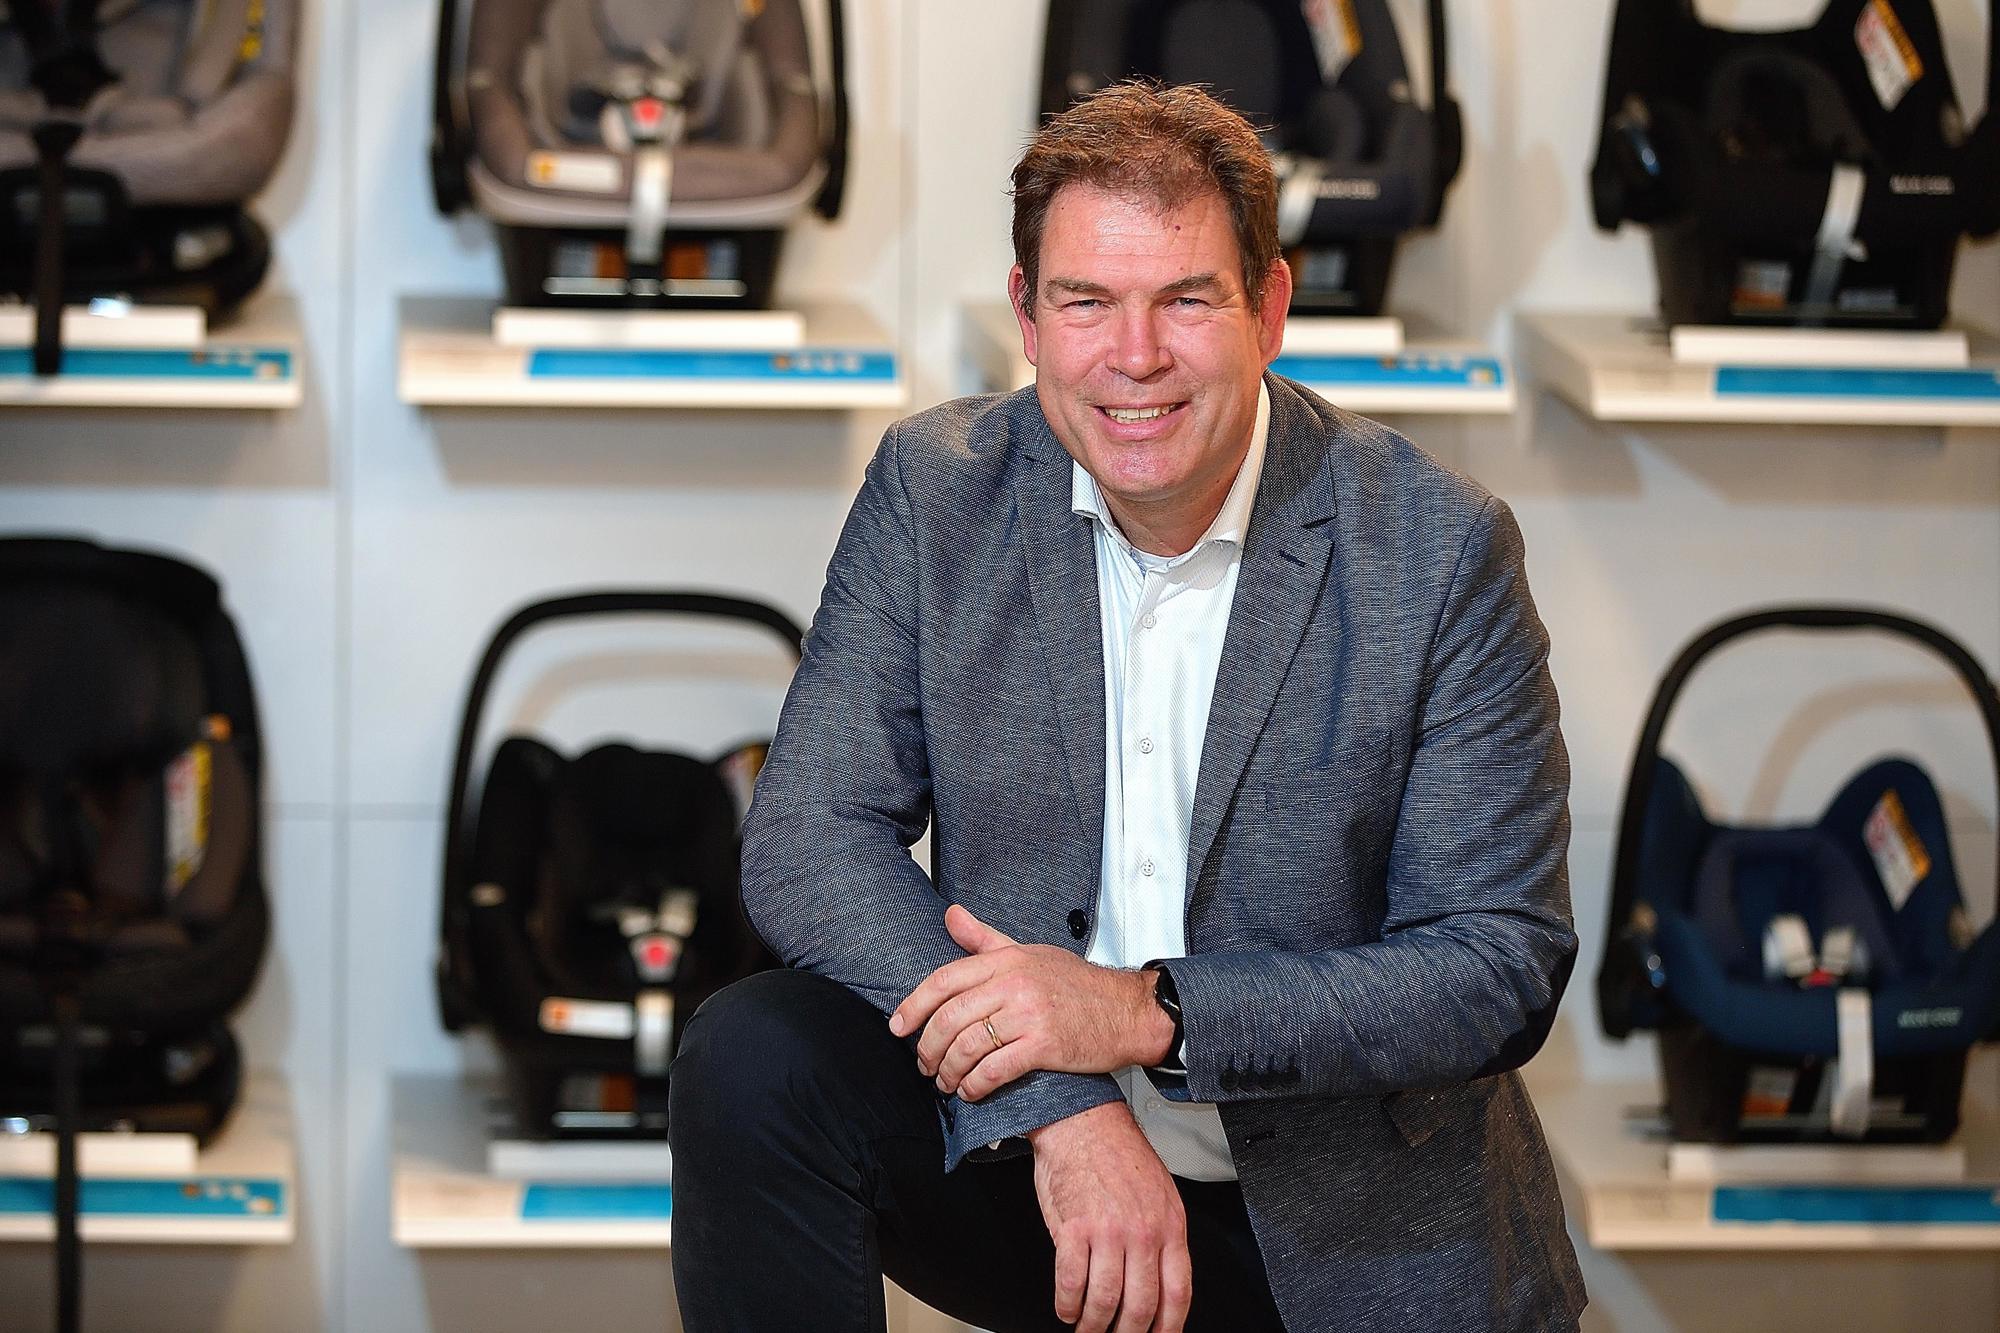 Maxi-Cosi sells its products in more than 100 countries, says Sjef van der Linden